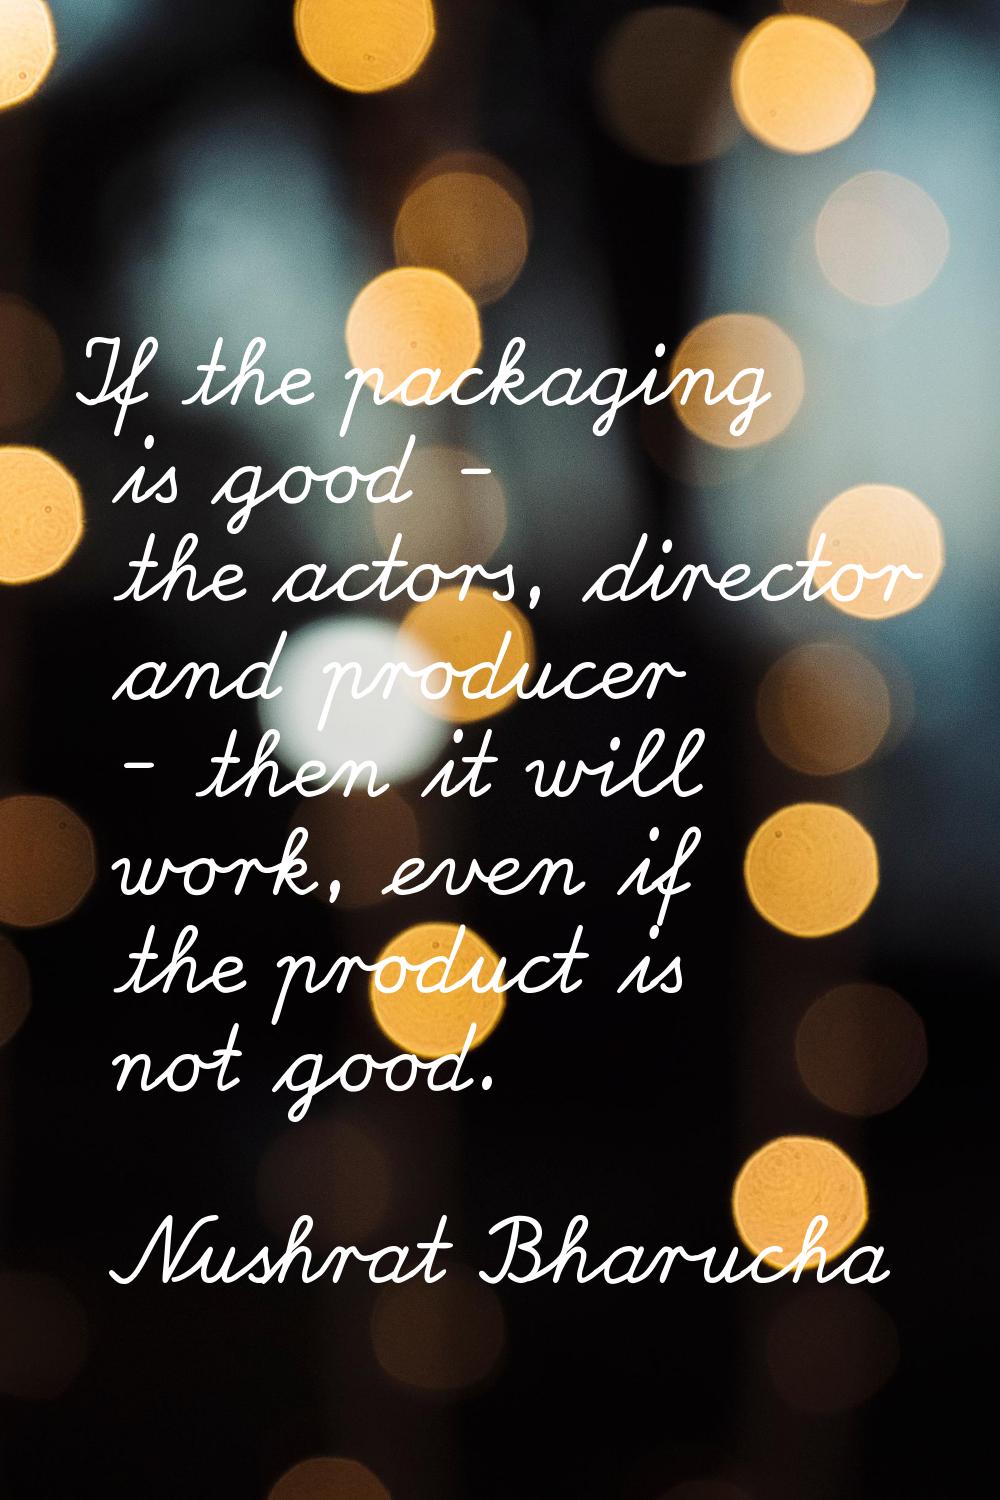 If the packaging is good - the actors, director and producer - then it will work, even if the produ